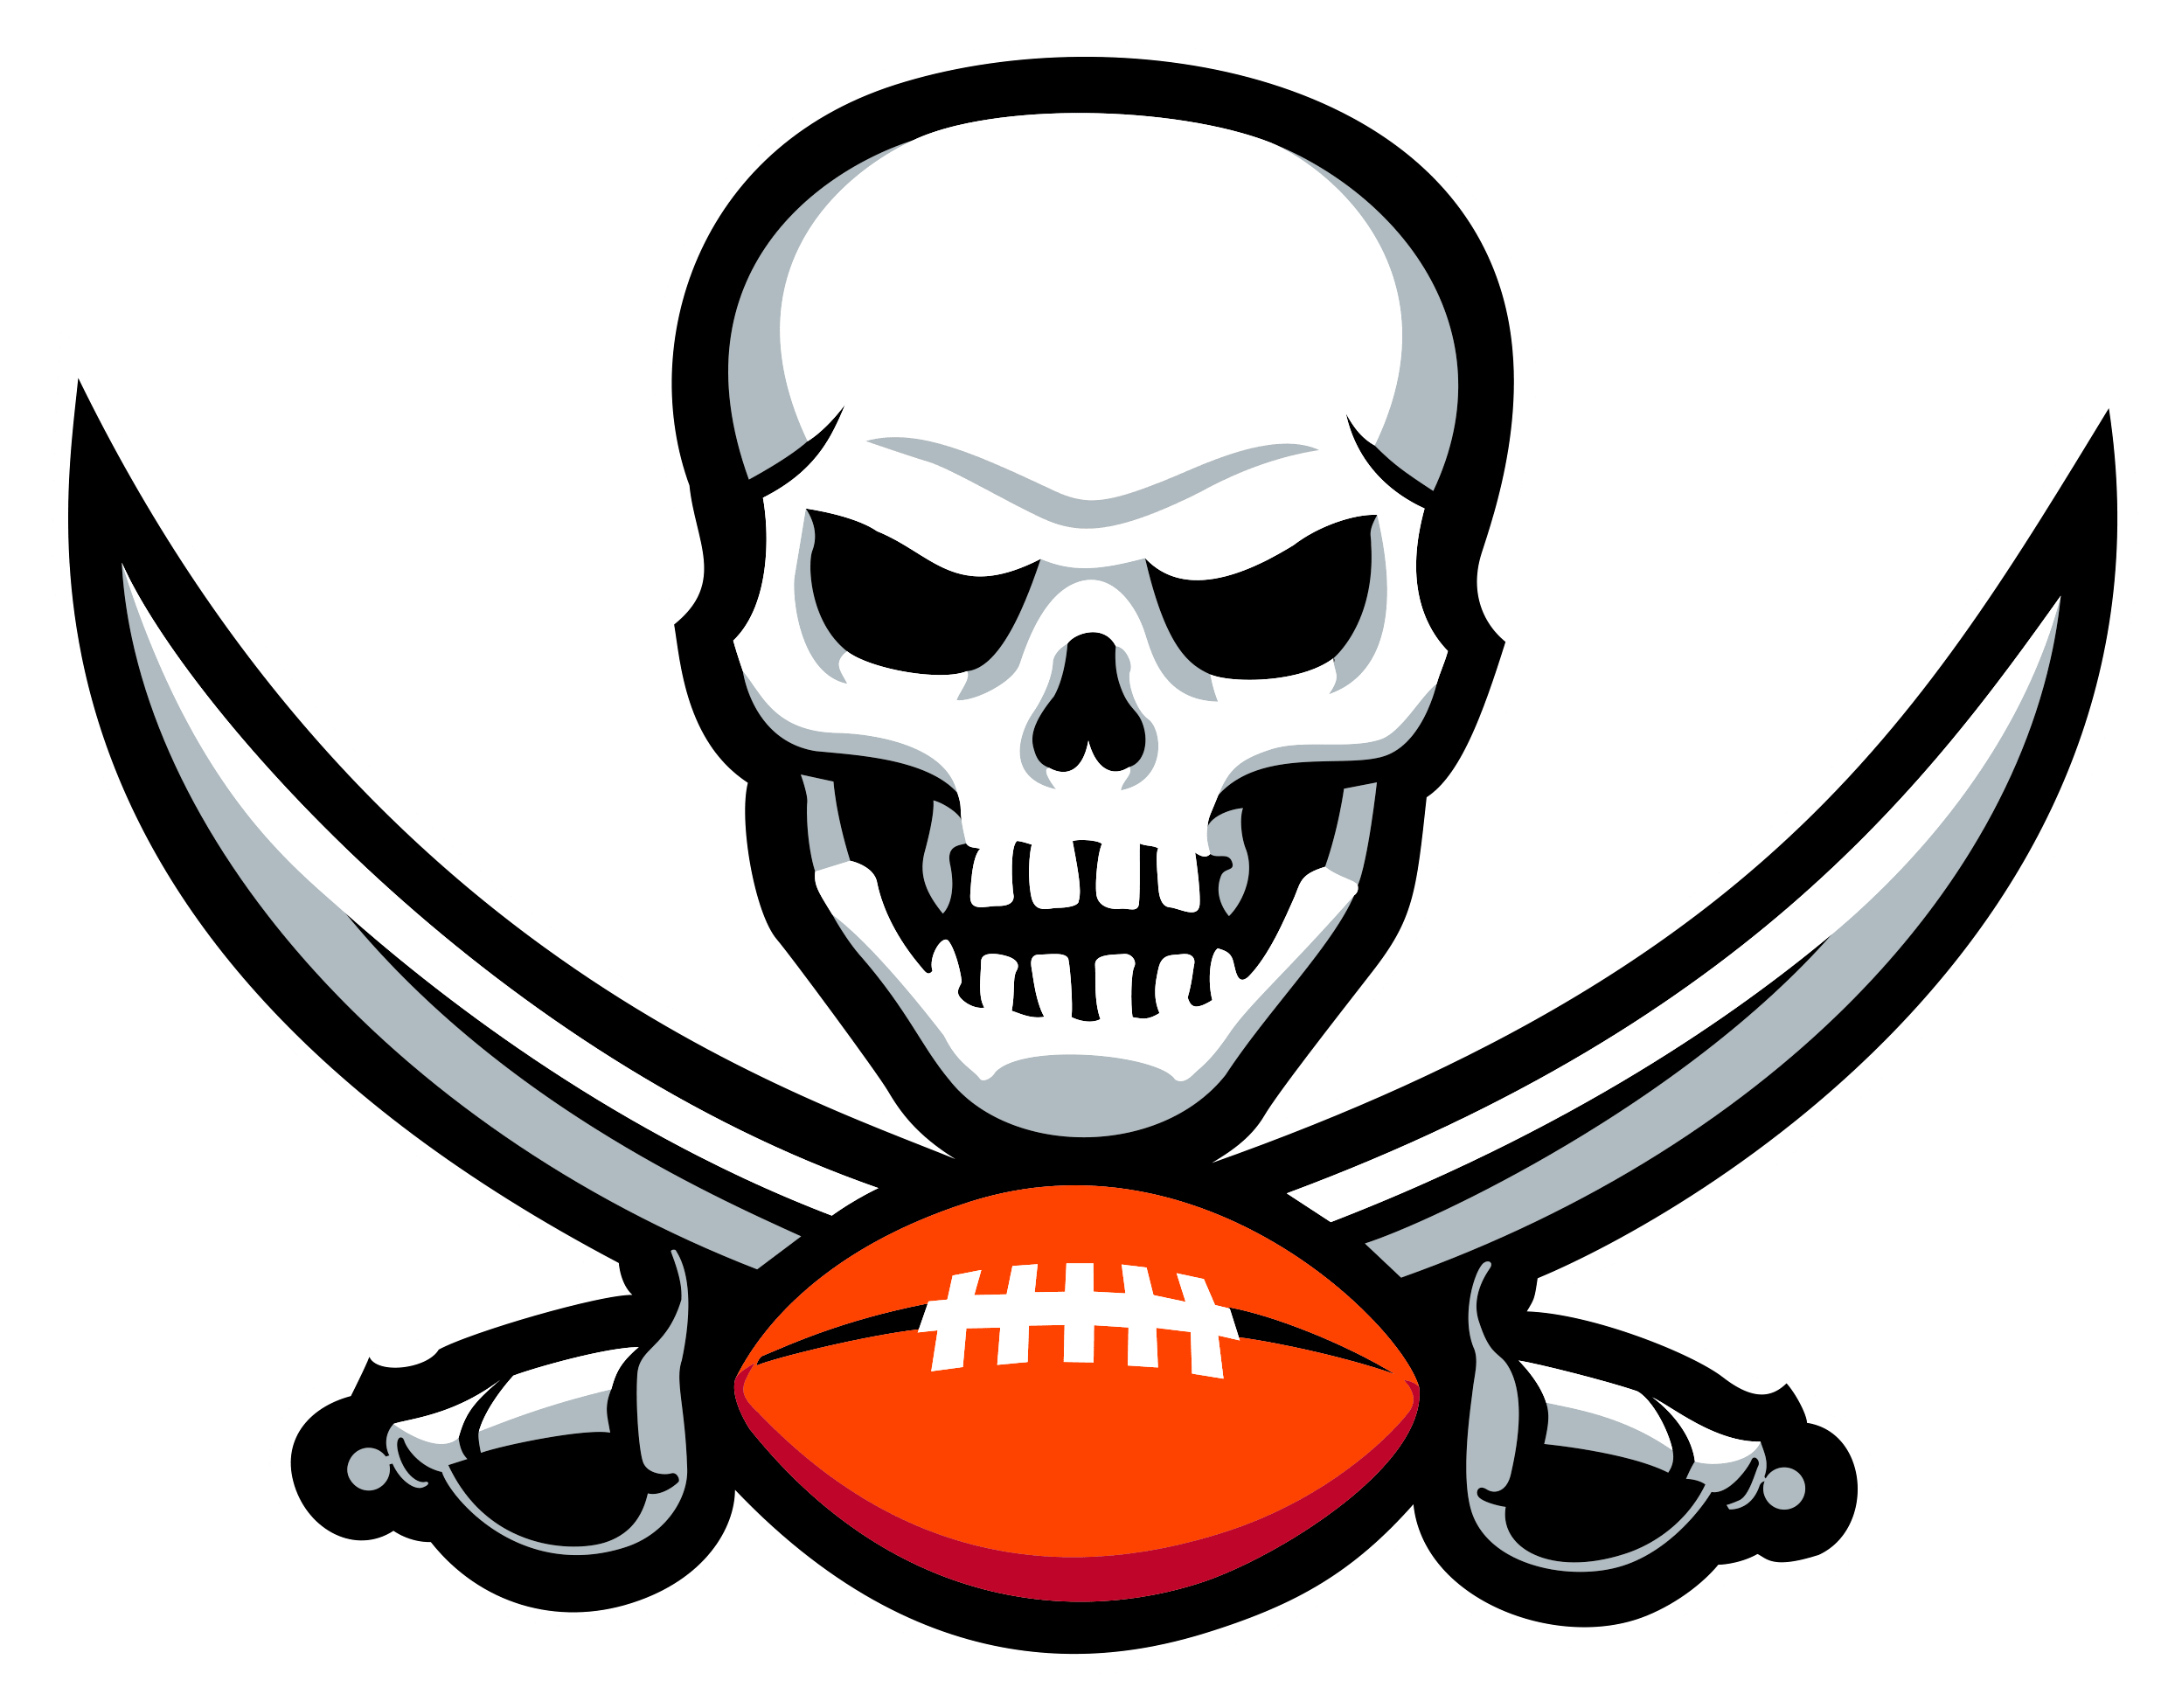 Tampa Bay Buccaneers SVG, SVG Files For Silhouette, Tampa Bay Buccaneers .....